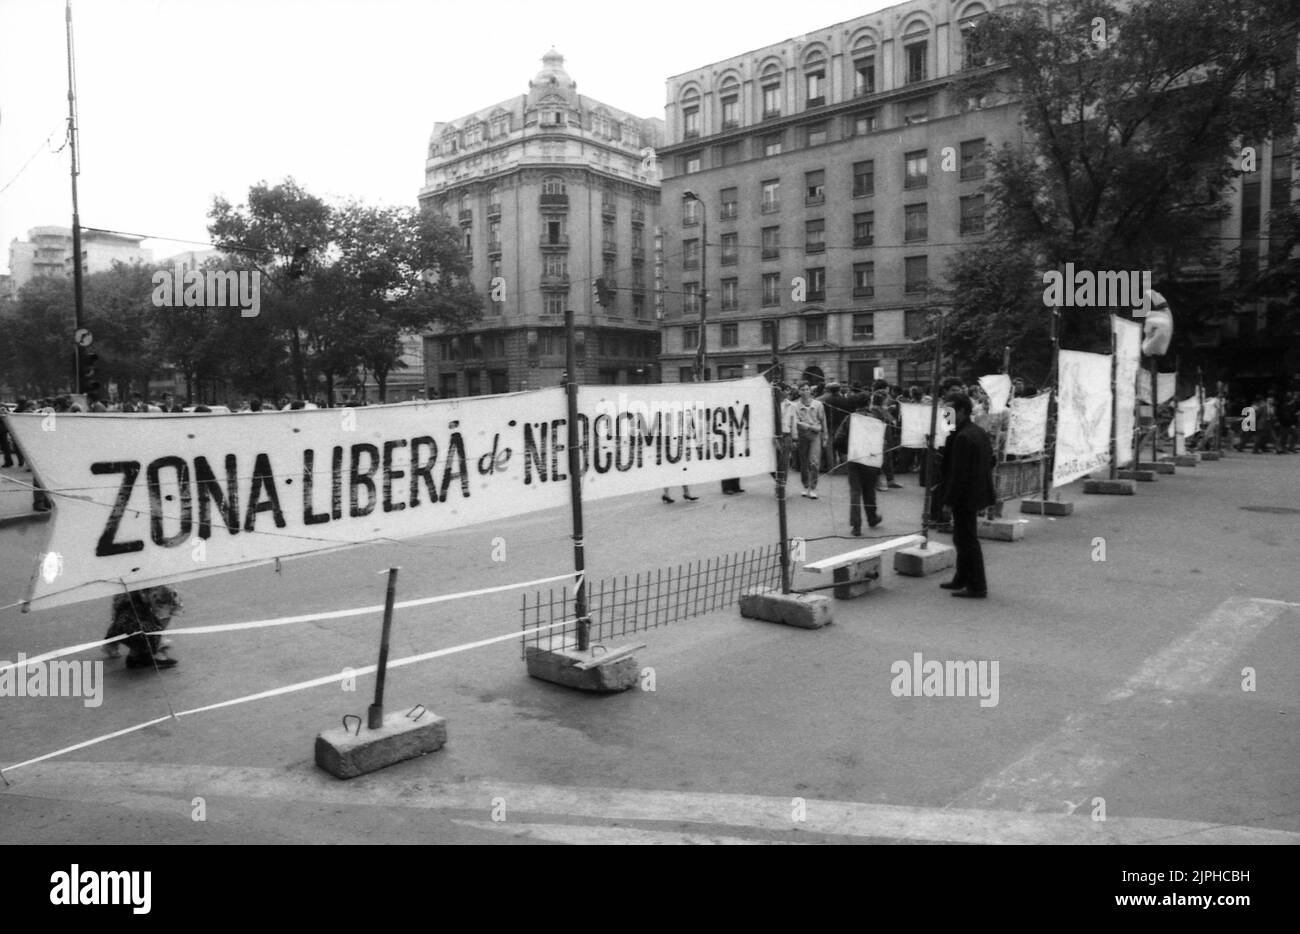 Bucharest, Romania, April 1990. 'Golaniada', a major anti-communism protest  in the University Square following the Romanian Revolution of 1989. People would gather daily to protest the ex-communists that grabbed the power after the Revolution. The protesters occupied and enclosed a large area in the University Square. The banner says 'Romania's neo-communism free zone'. Stock Photo